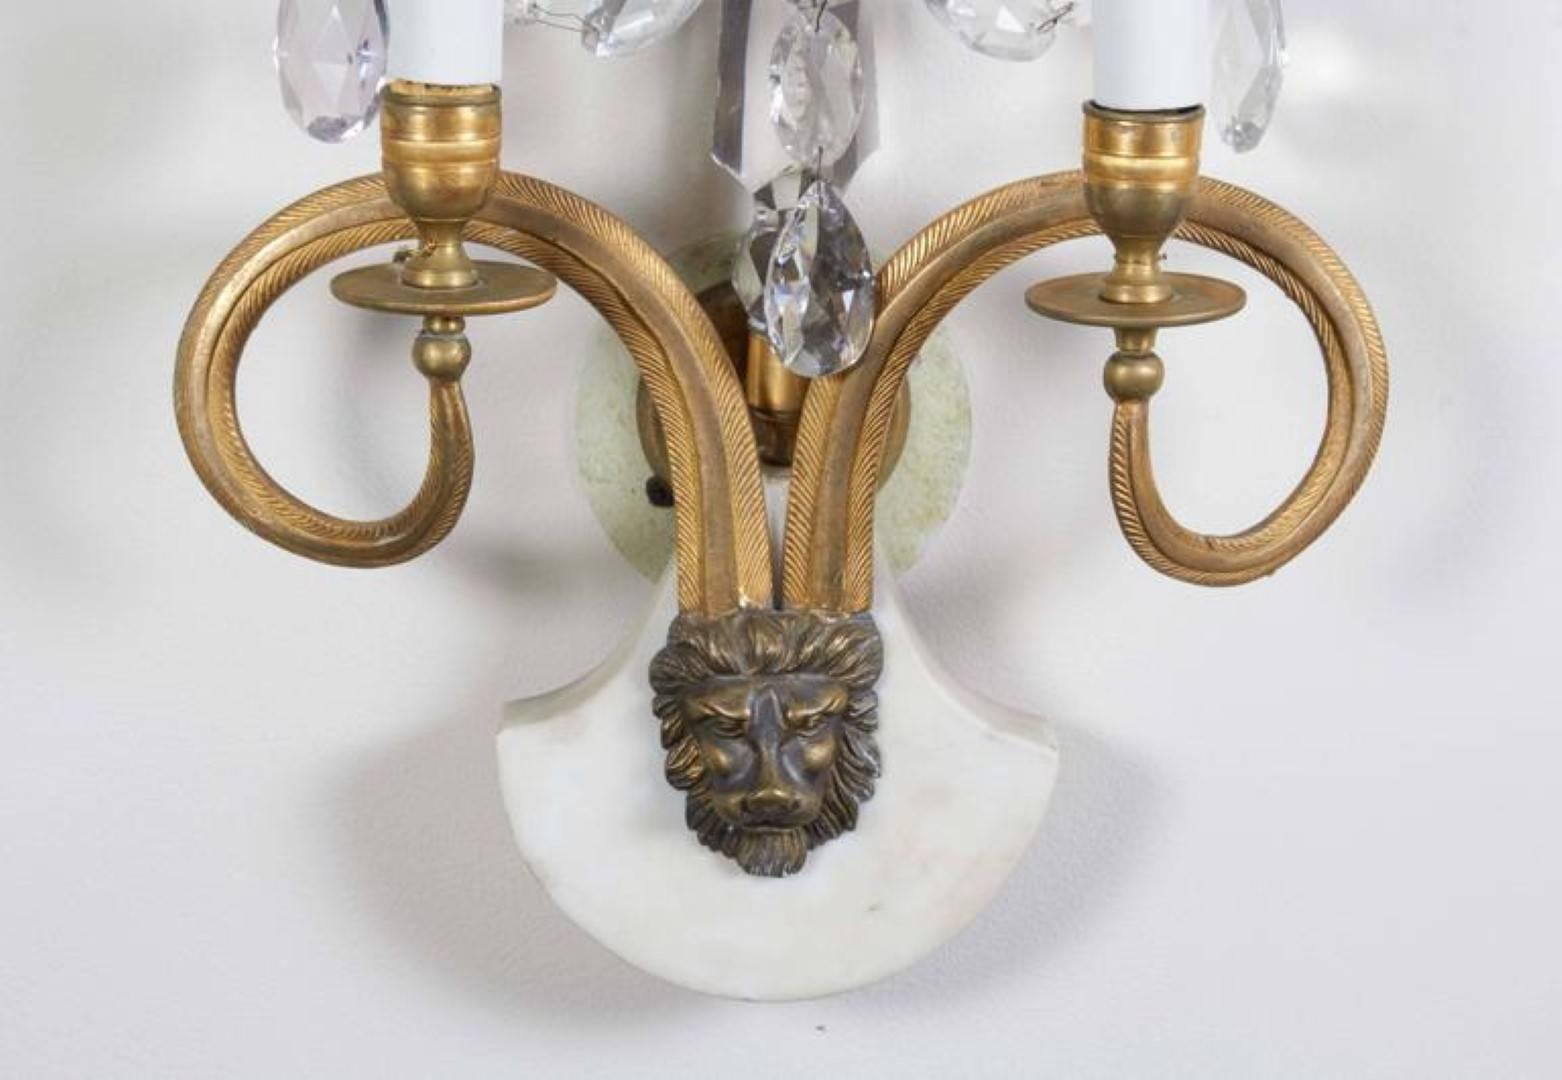 A pair of exceptional 18th century Baltic gilt bronze and crystal beaded sconces, of Neoclassical style, the white marble plinth form base with bronze lion mask mount issuing 2 arched candle arms, the base supporting a central crystal obelisk stem